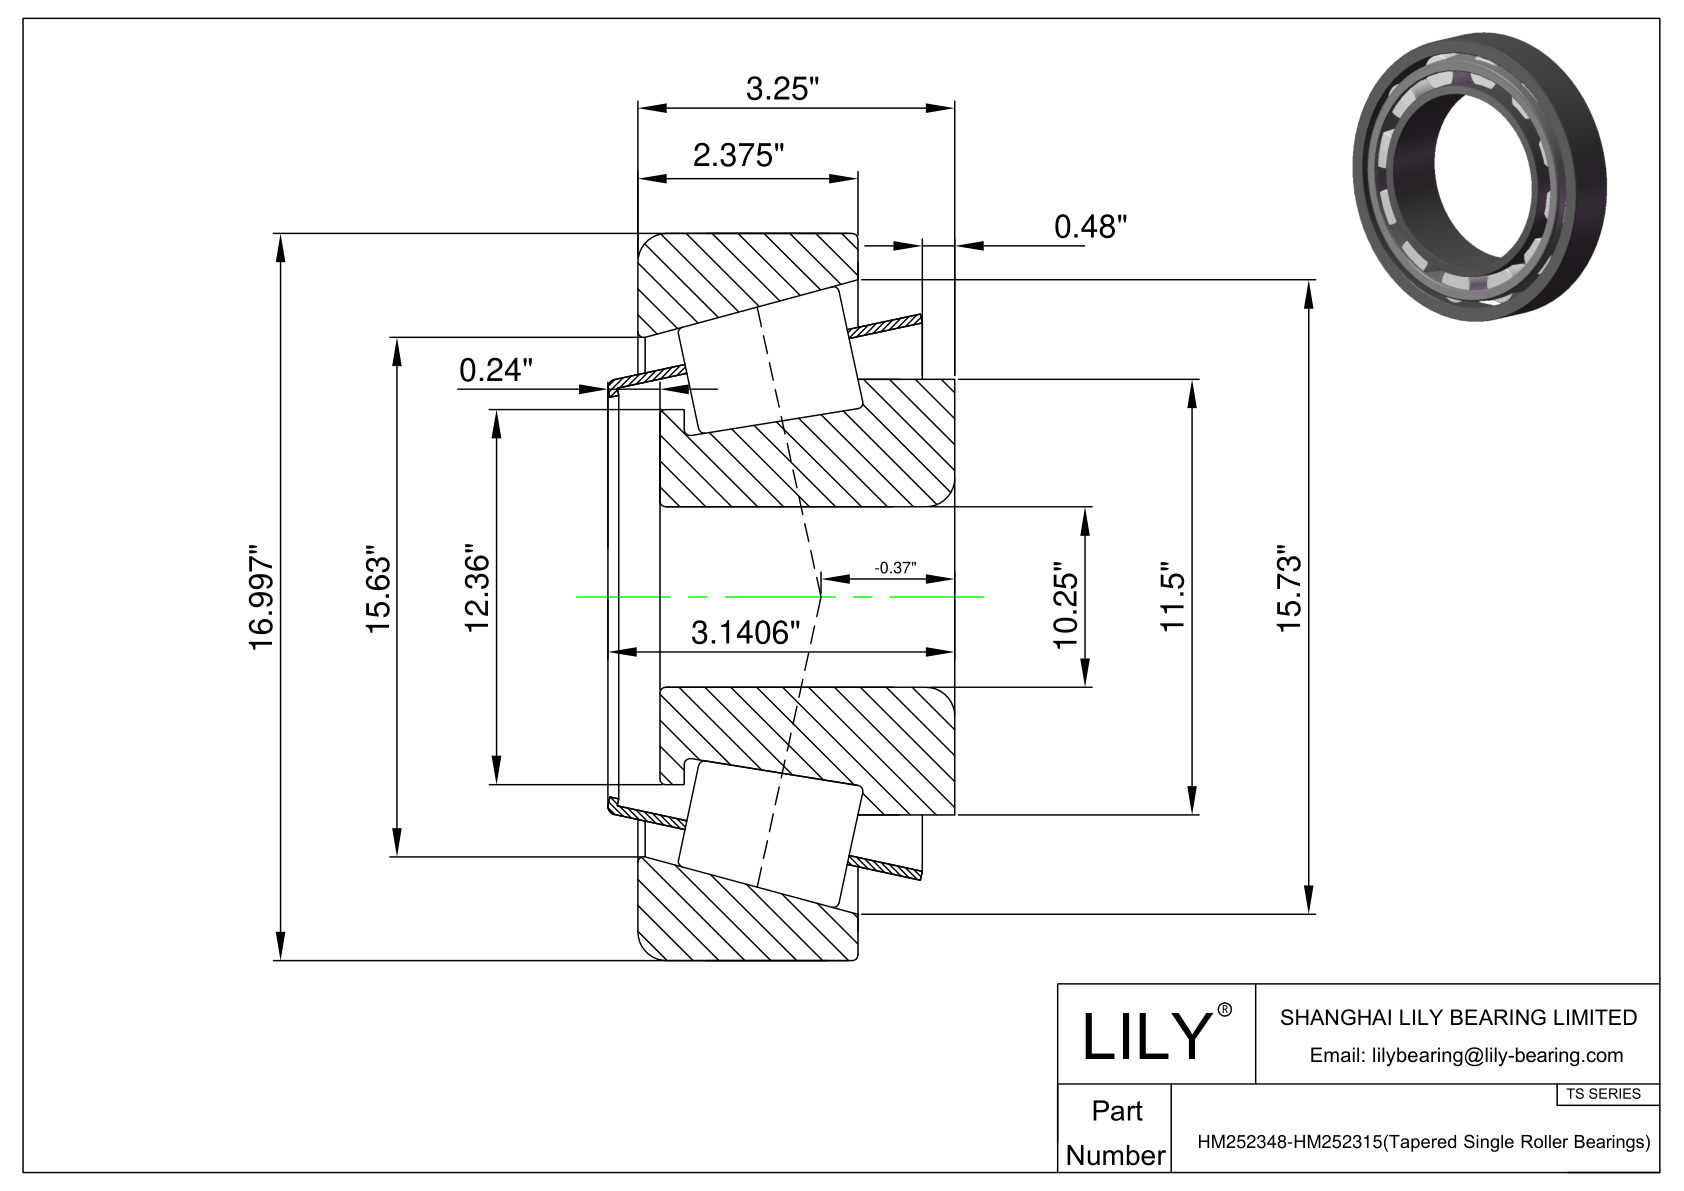 HM252348-HM252315 TS (Tapered Single Roller Bearings) (Imperial) cad drawing